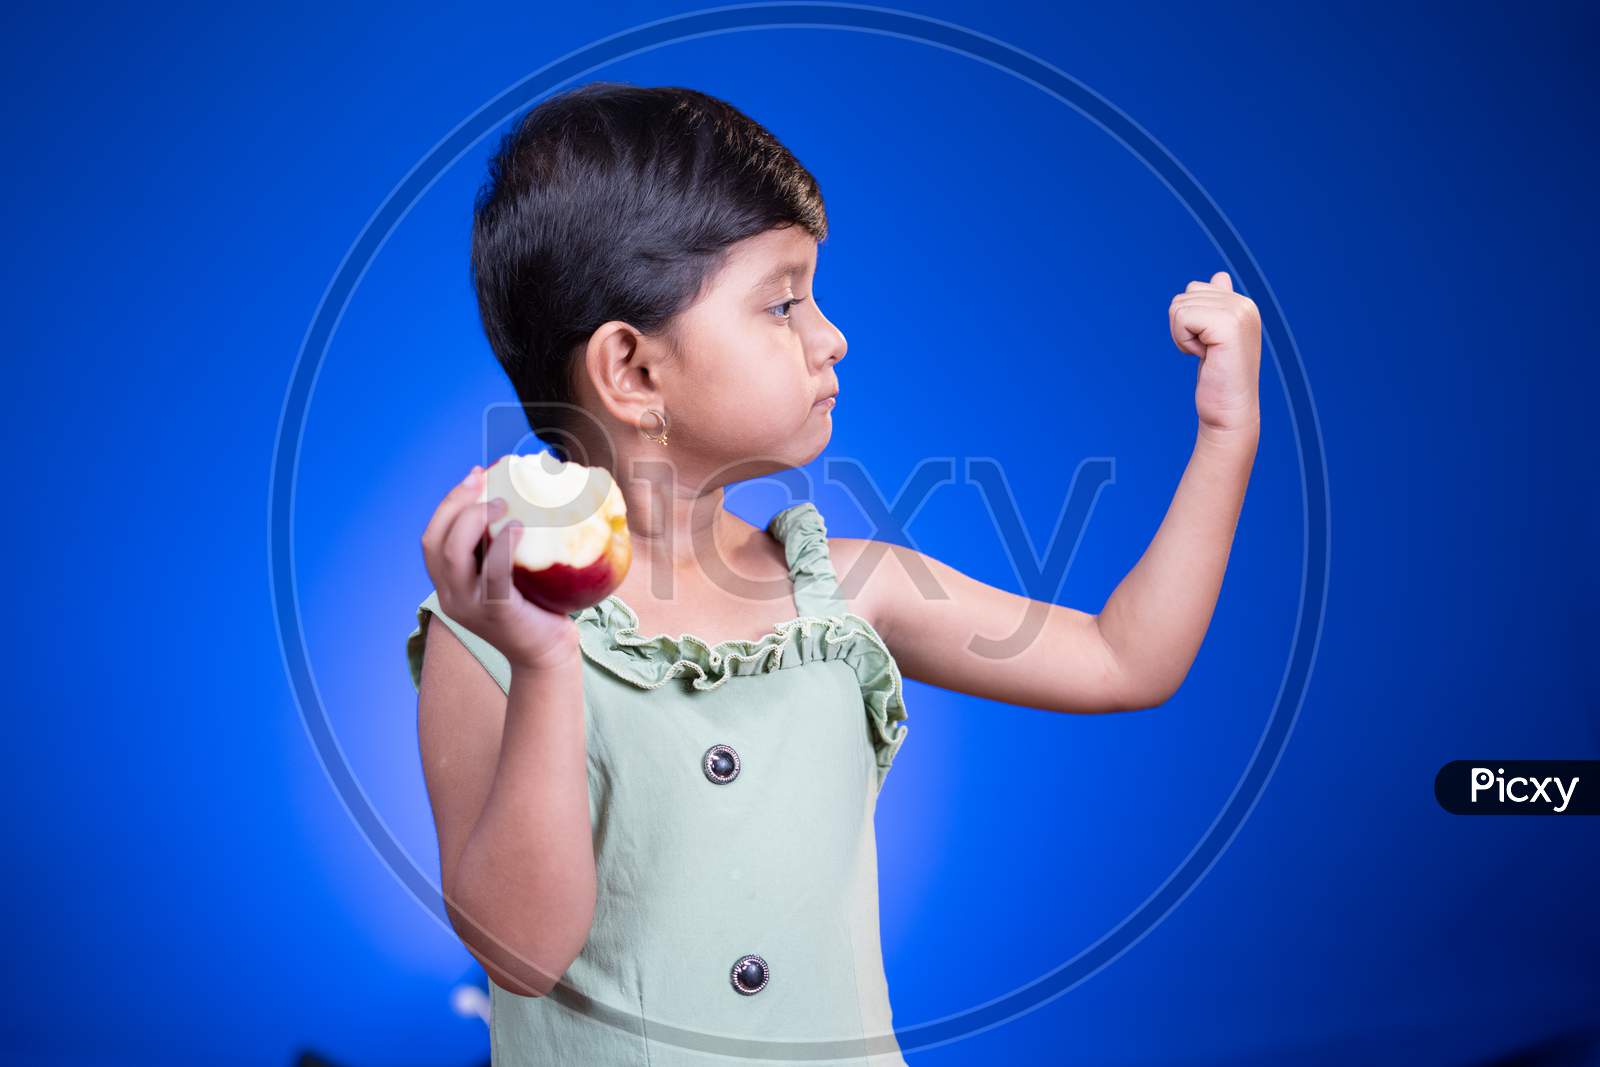 Cute Little Girl Eating Apple And Showing Muscle Biceps On Blue Studio Background - Concept Showing Of Healthy Food Or Eating Fruits Makes Stronger.